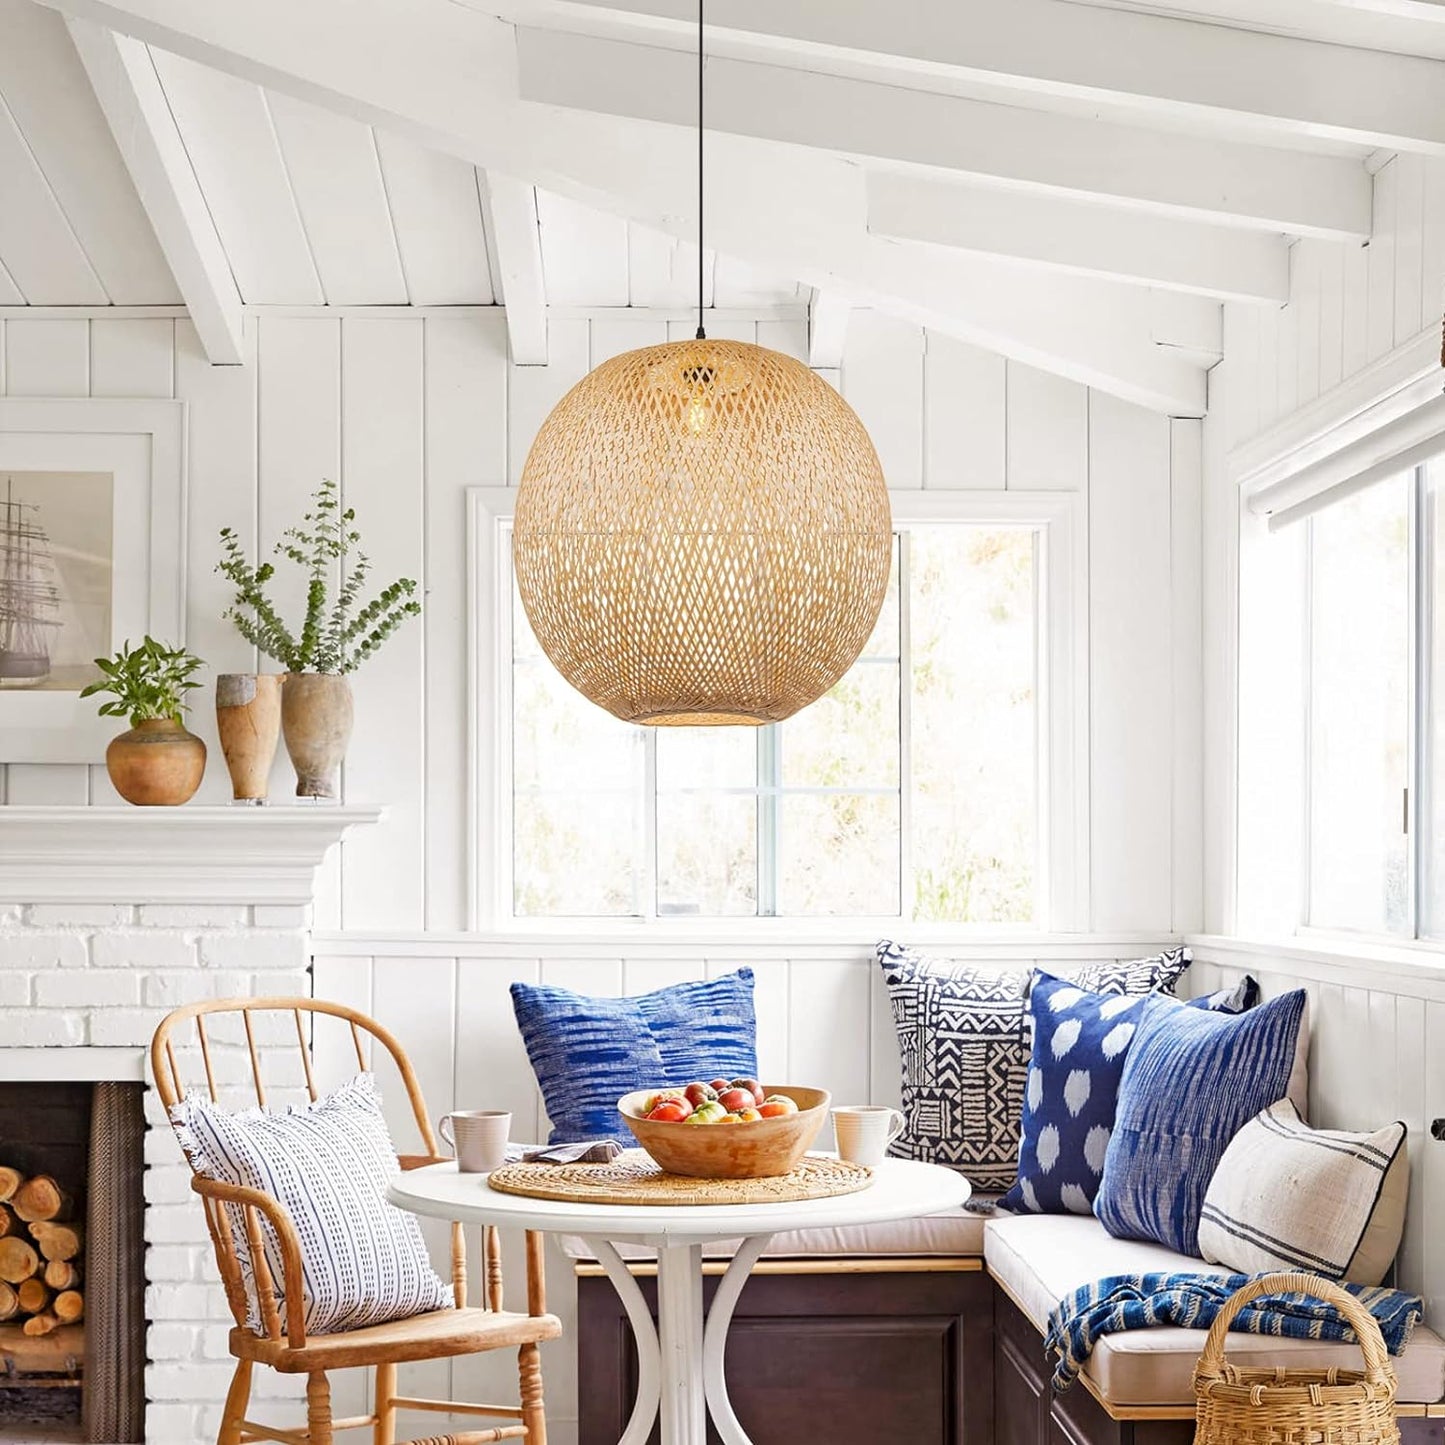 Arturesthome Natural Bamboo Pendant Lamp, Round Hanging Ceiling Light Wicker Chandelier, Hand-Woven Boho Basket Lampshade for Kitchen Island Living Room